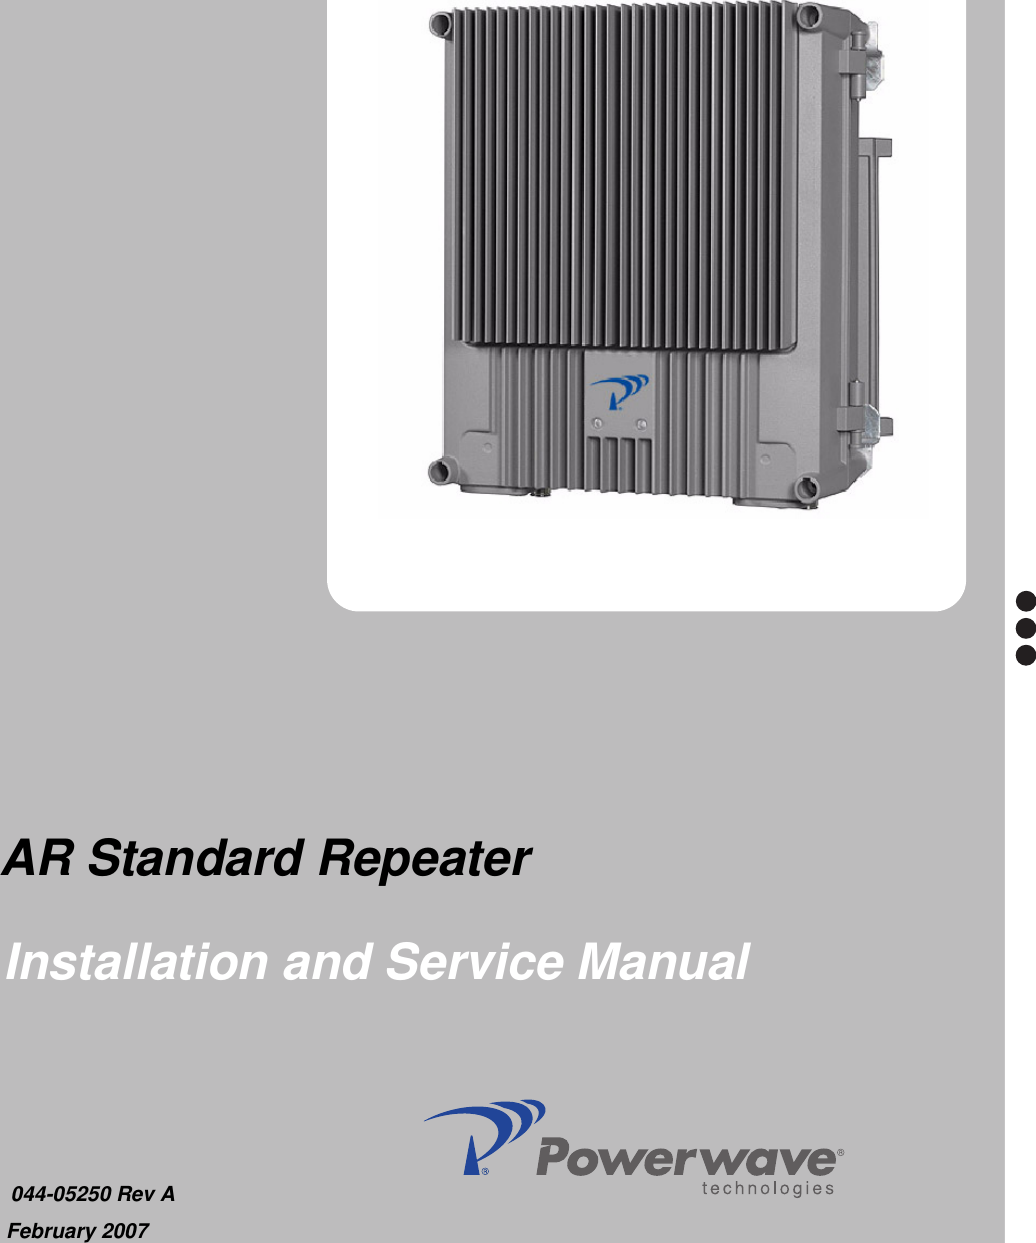    044-05250 Rev AFebruary 2007 Installation and Service Manual   AR Standard Repeater  